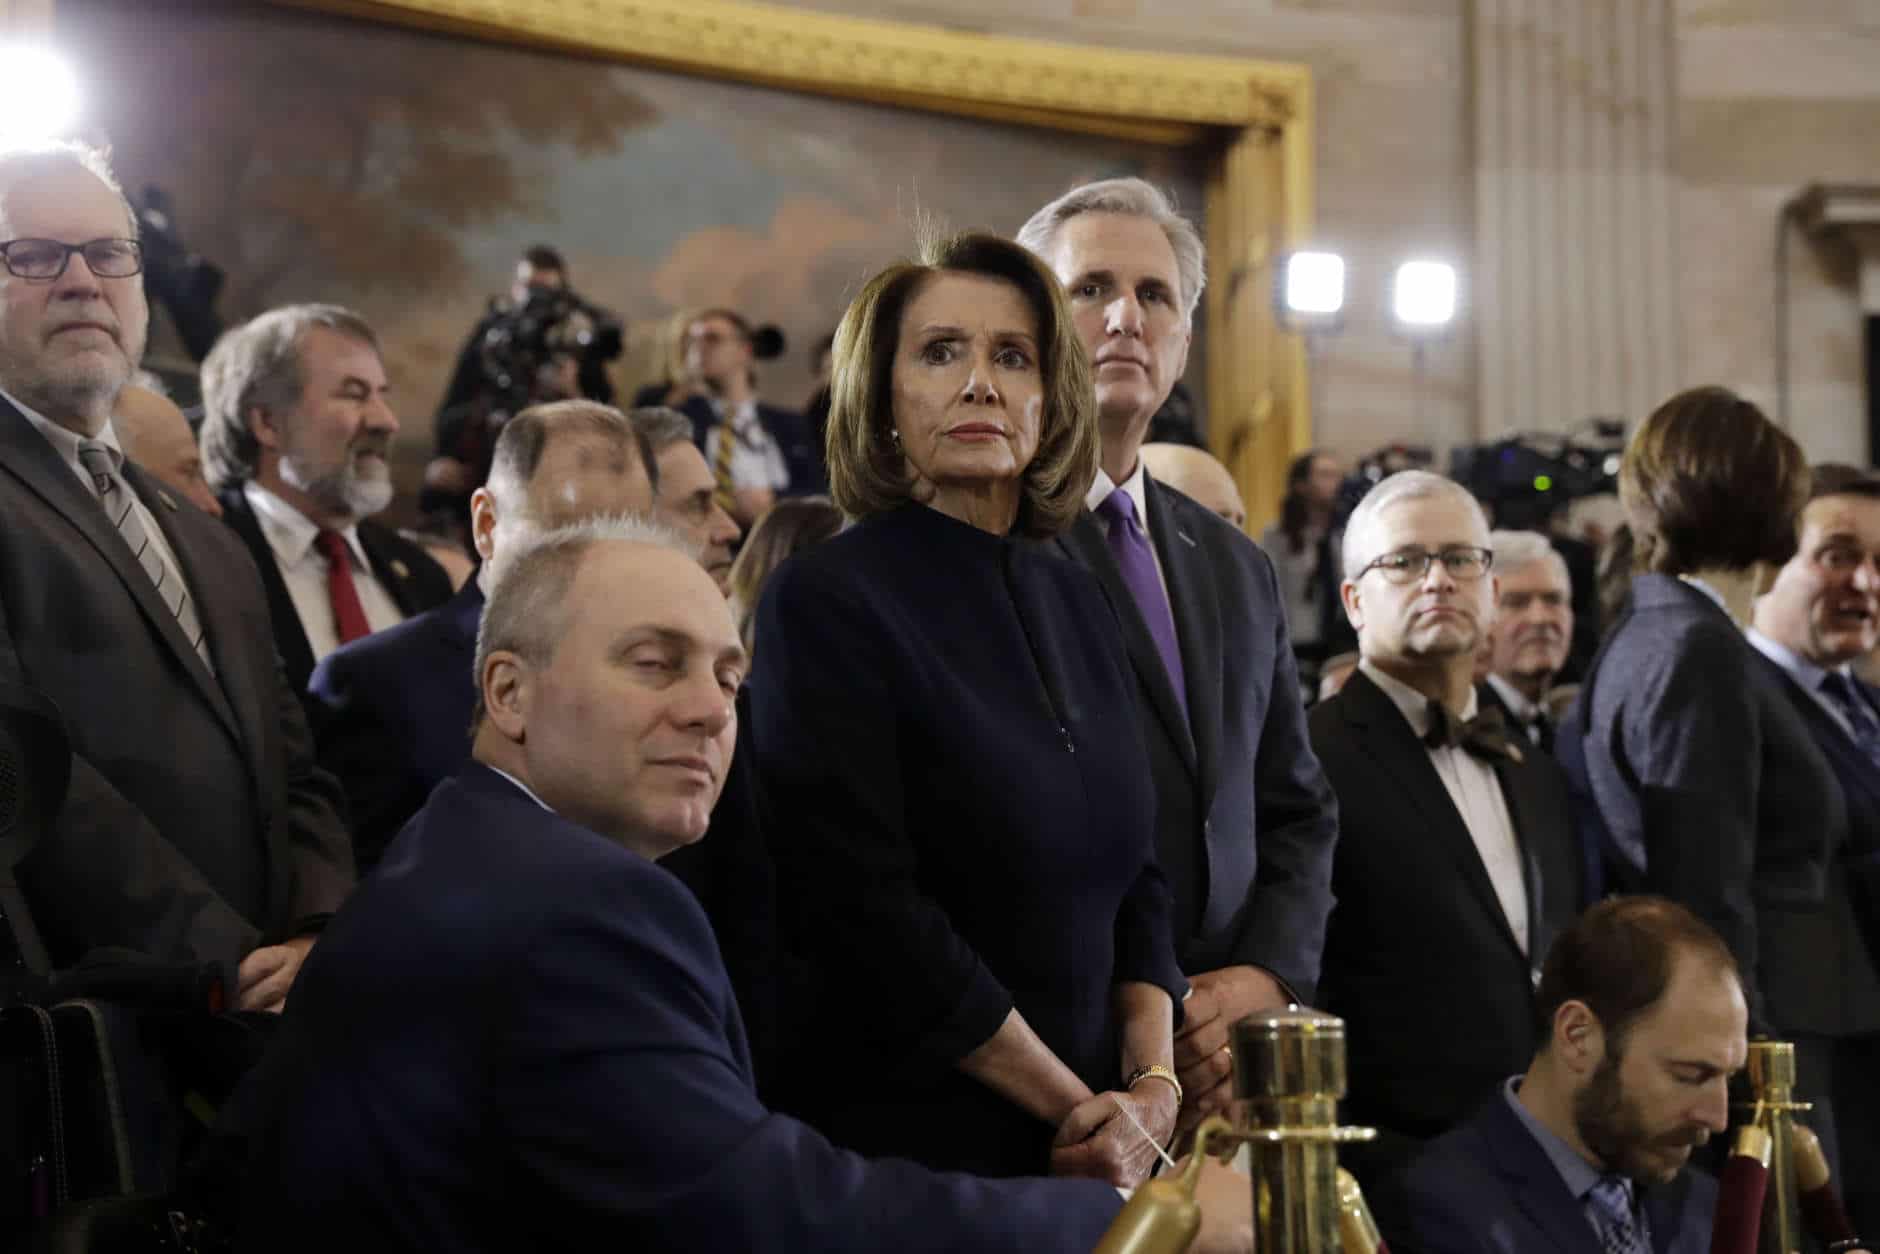 House Majority Whip Steve Scalise, R-La., foreground, House Minority Leader Nancy Pelosi, D-Calif., center and House Majority Leader Kevin McCarthy, R-Calif., right and waits for the ceremony to begin honoring Reverend Billy Graham in the Rotunda of the U.S. Capitol building, Wednesday, Feb. 28, in Washington. (AP Photo/Evan Vucci)